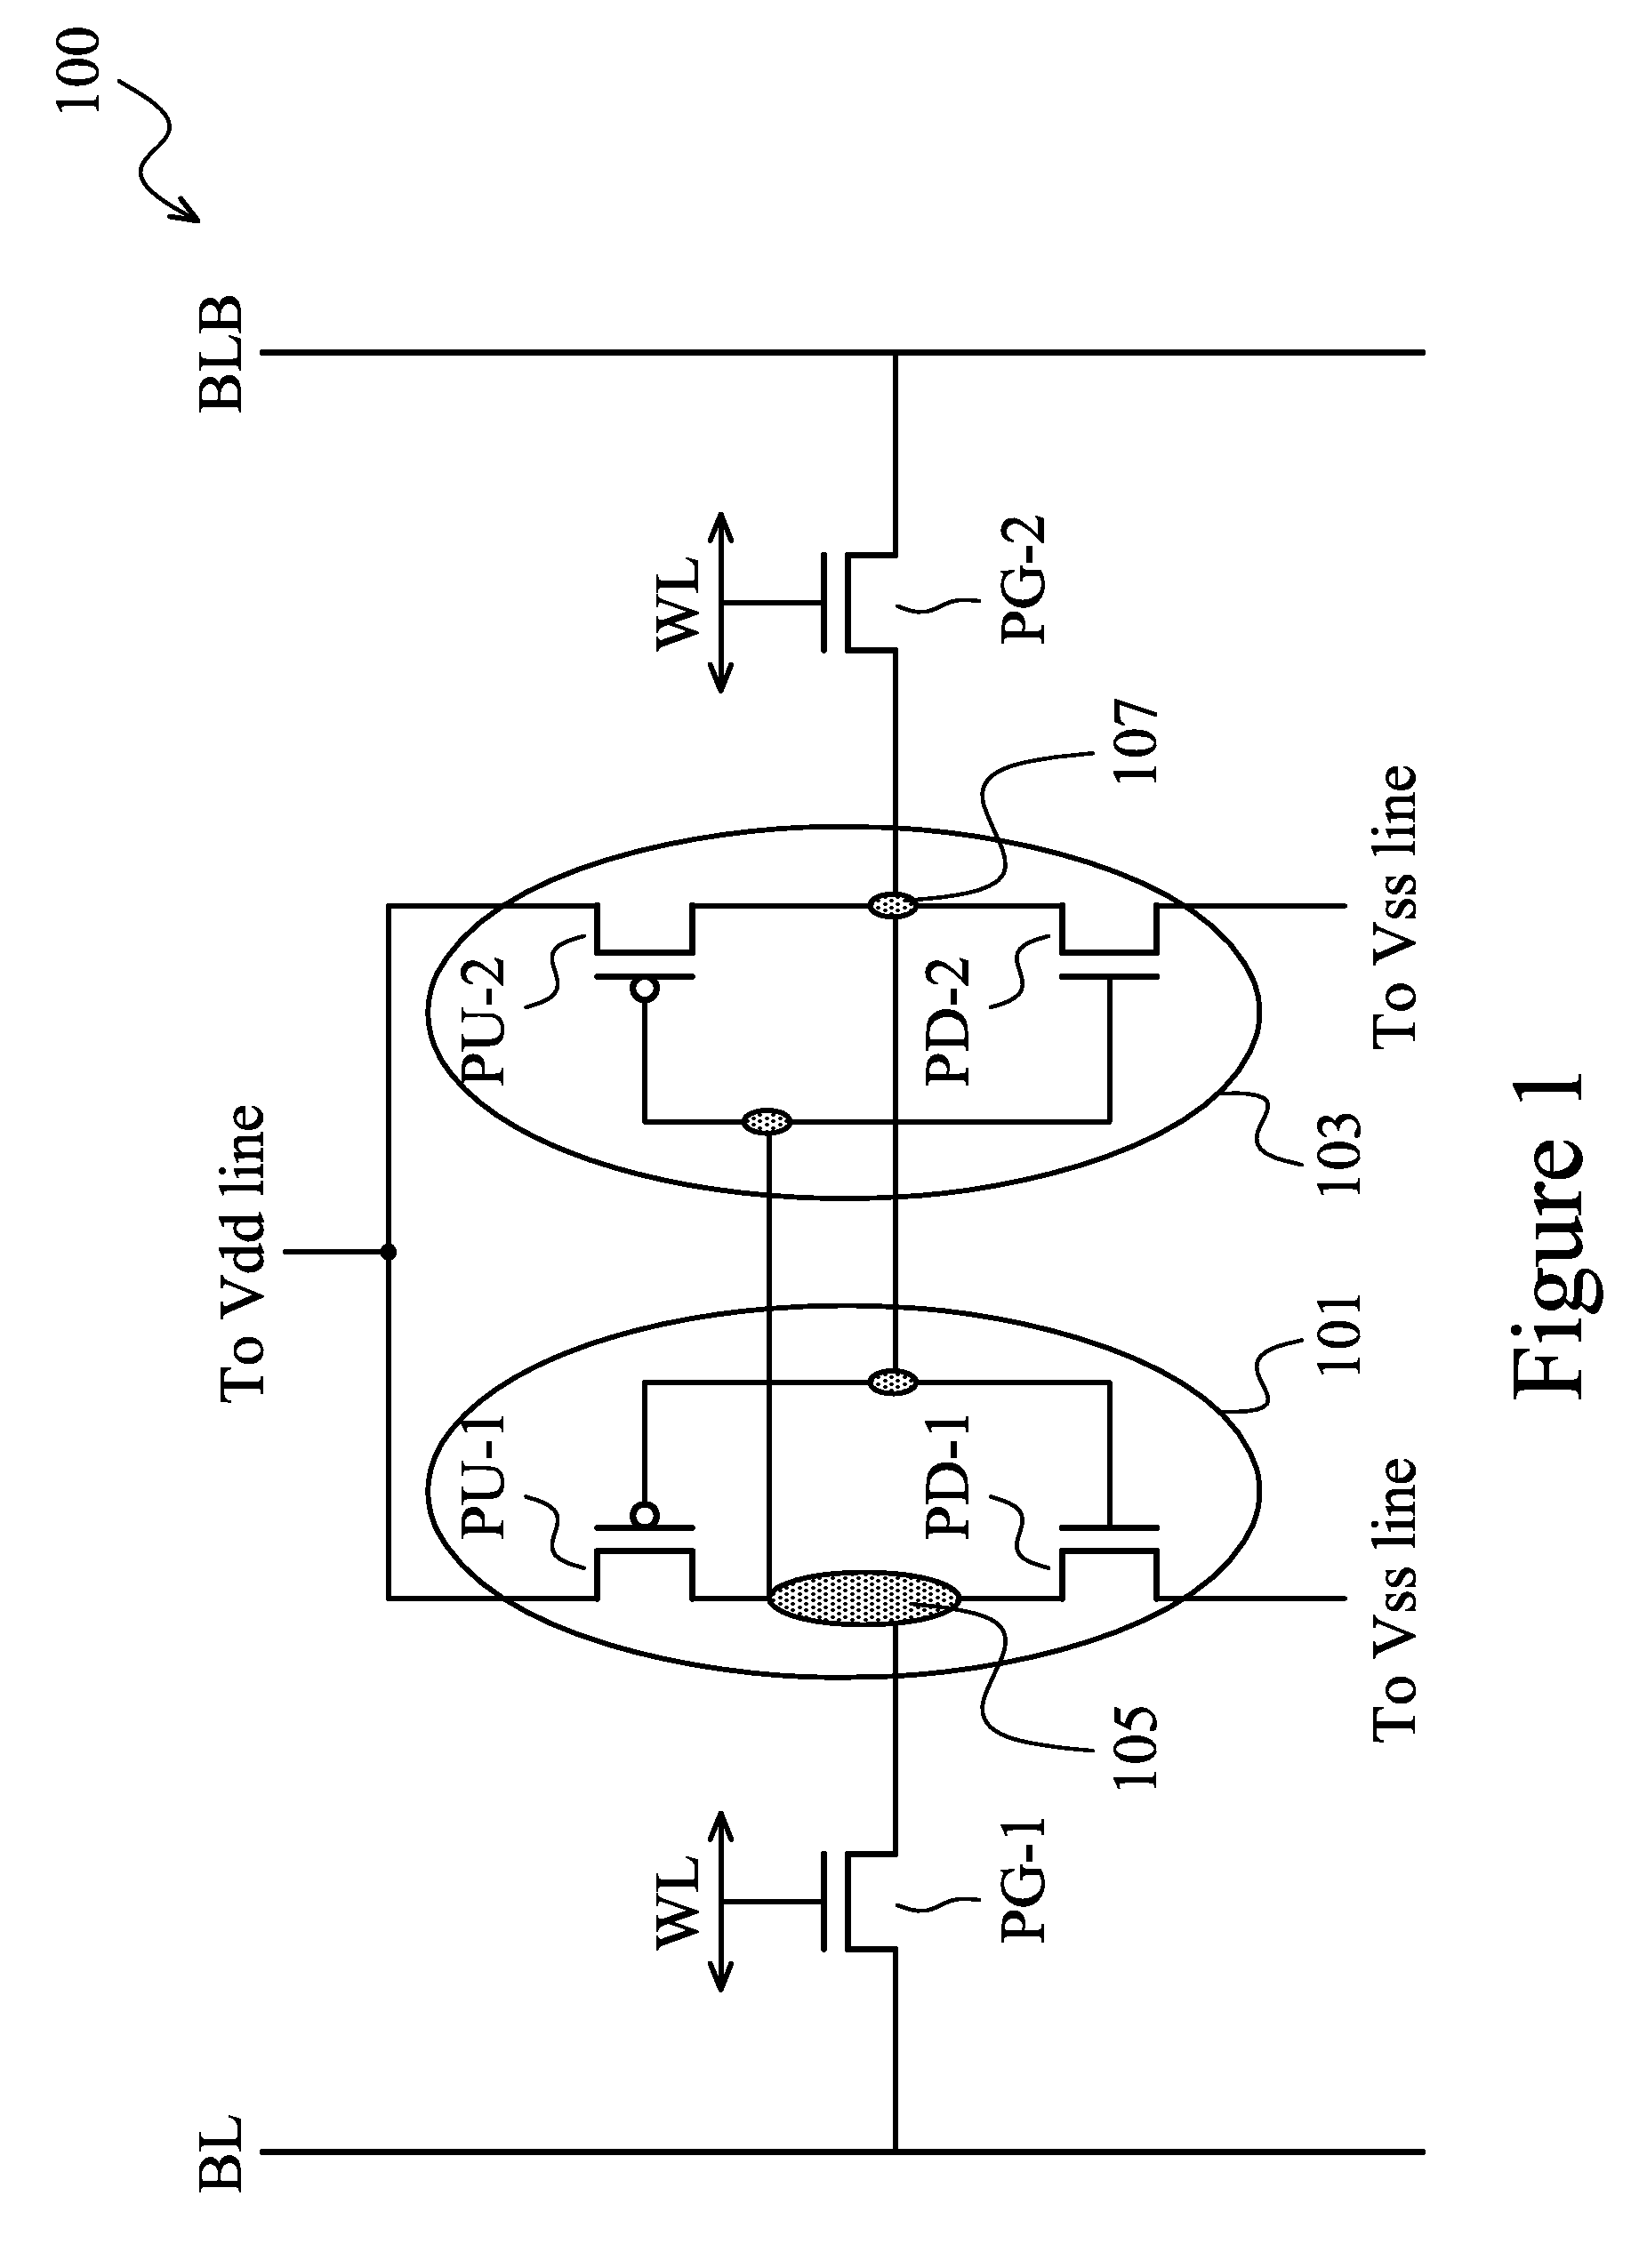 Cell Layout for SRAM FinFET Transistors